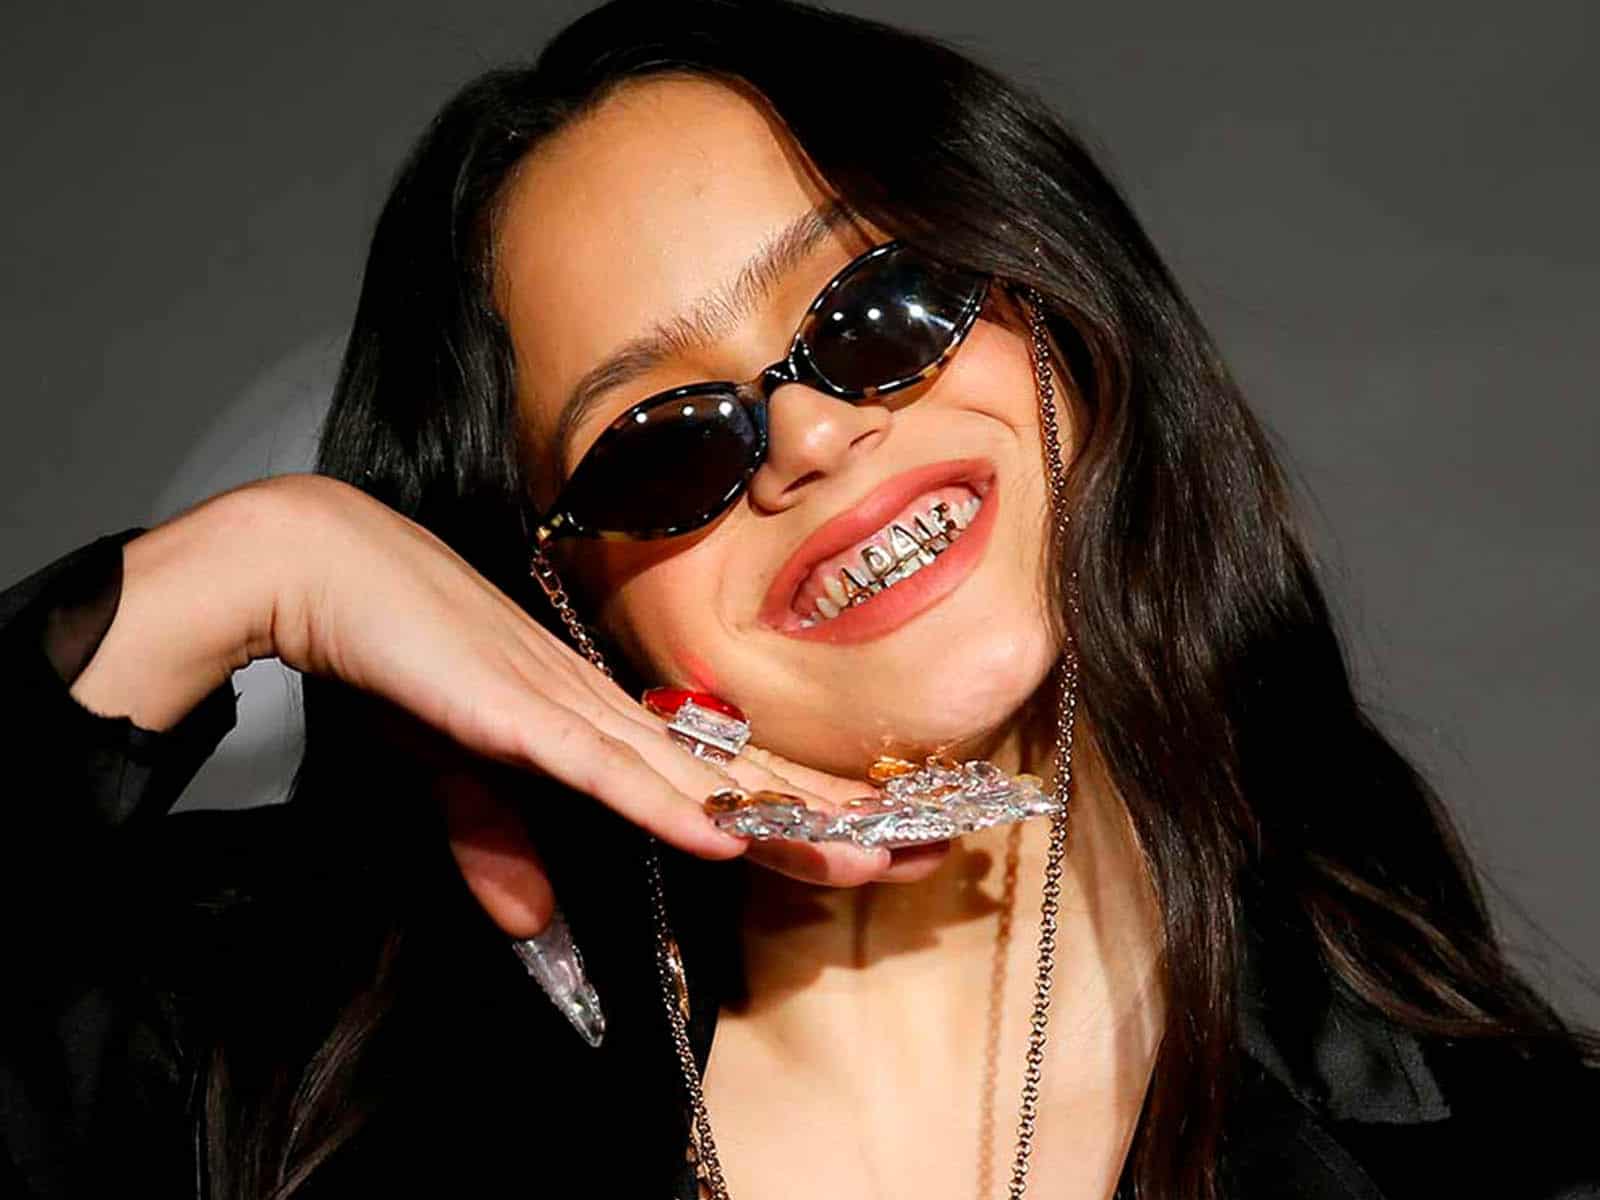 Grillz and dental jewellery: the new trend that’s hot this spring